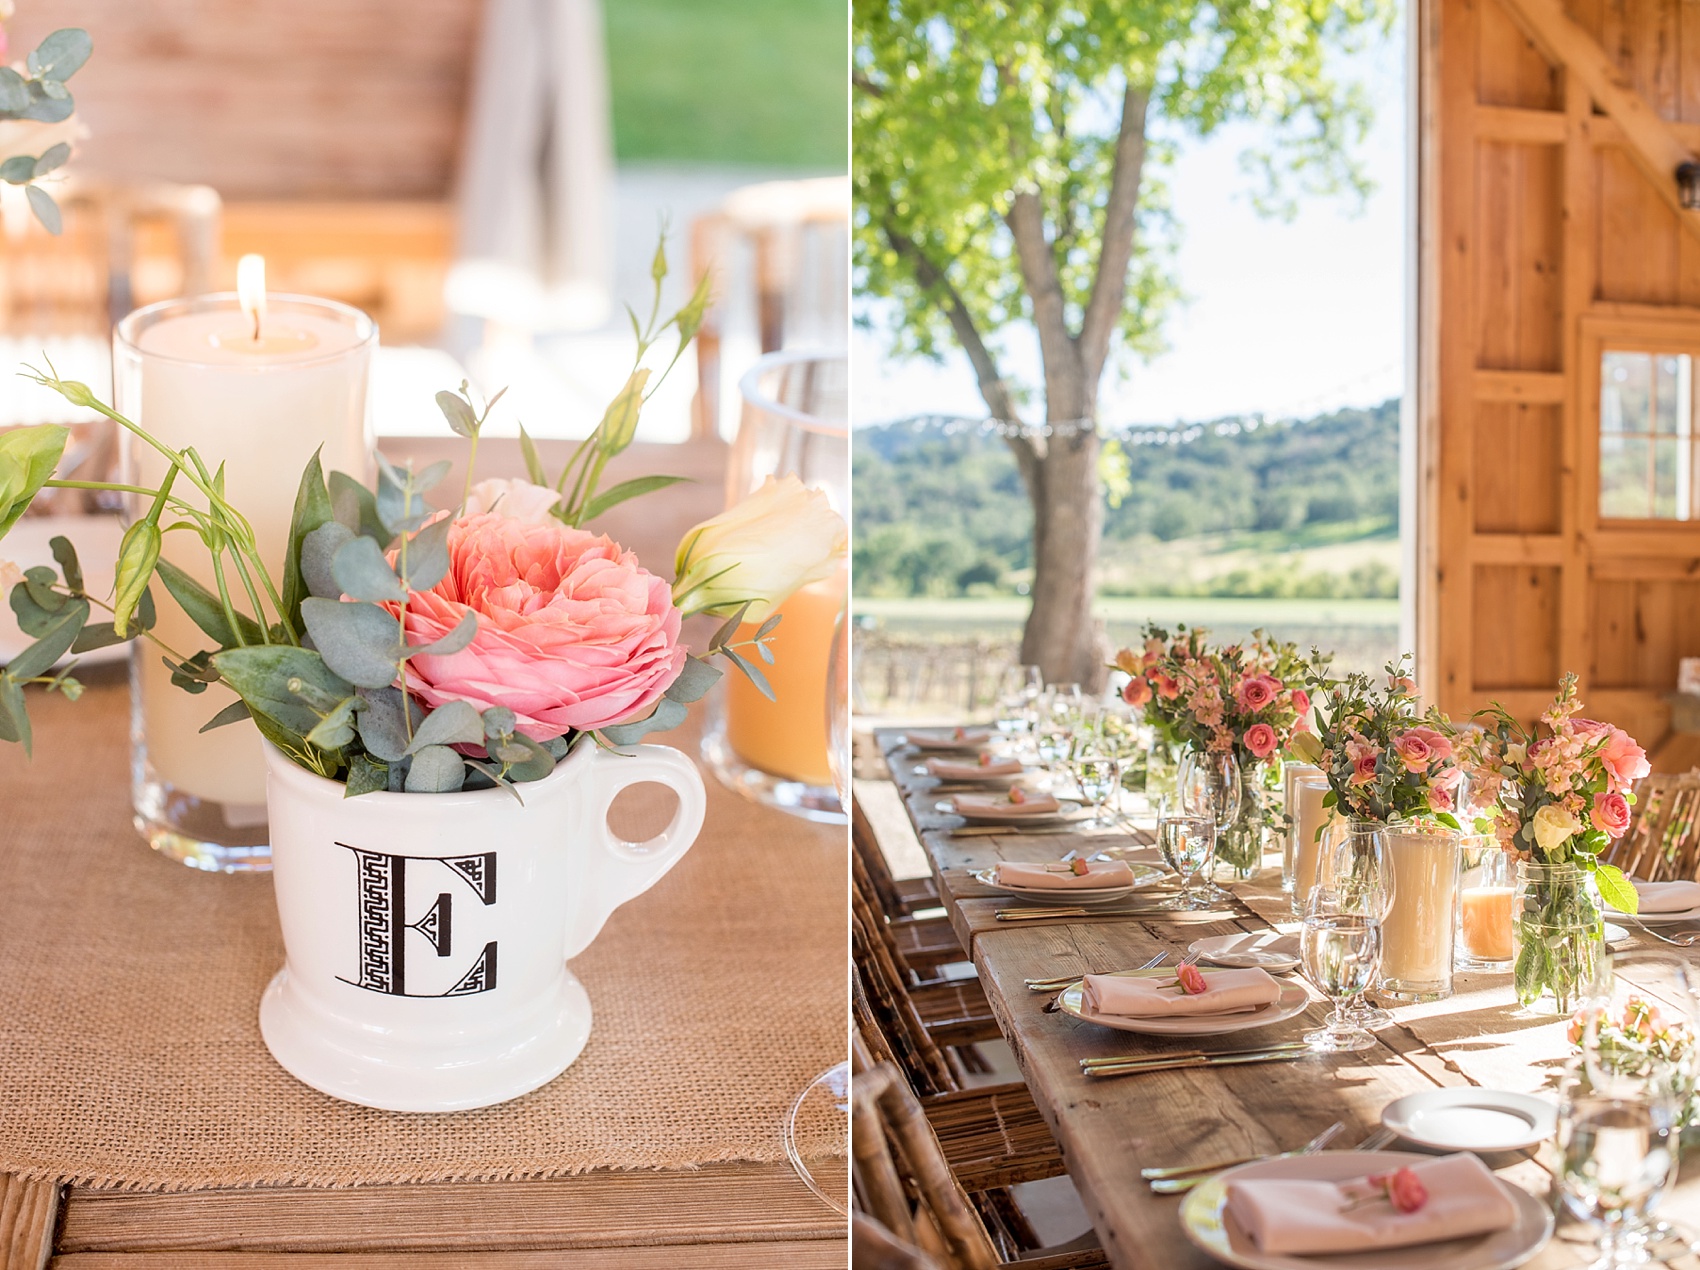 Spring vineyard elopement with pink flowers and barn reception. Photos by Mikkel Paige, destination wedding photographer. Held at HammerSky Vineyard, south of San Francisco. 